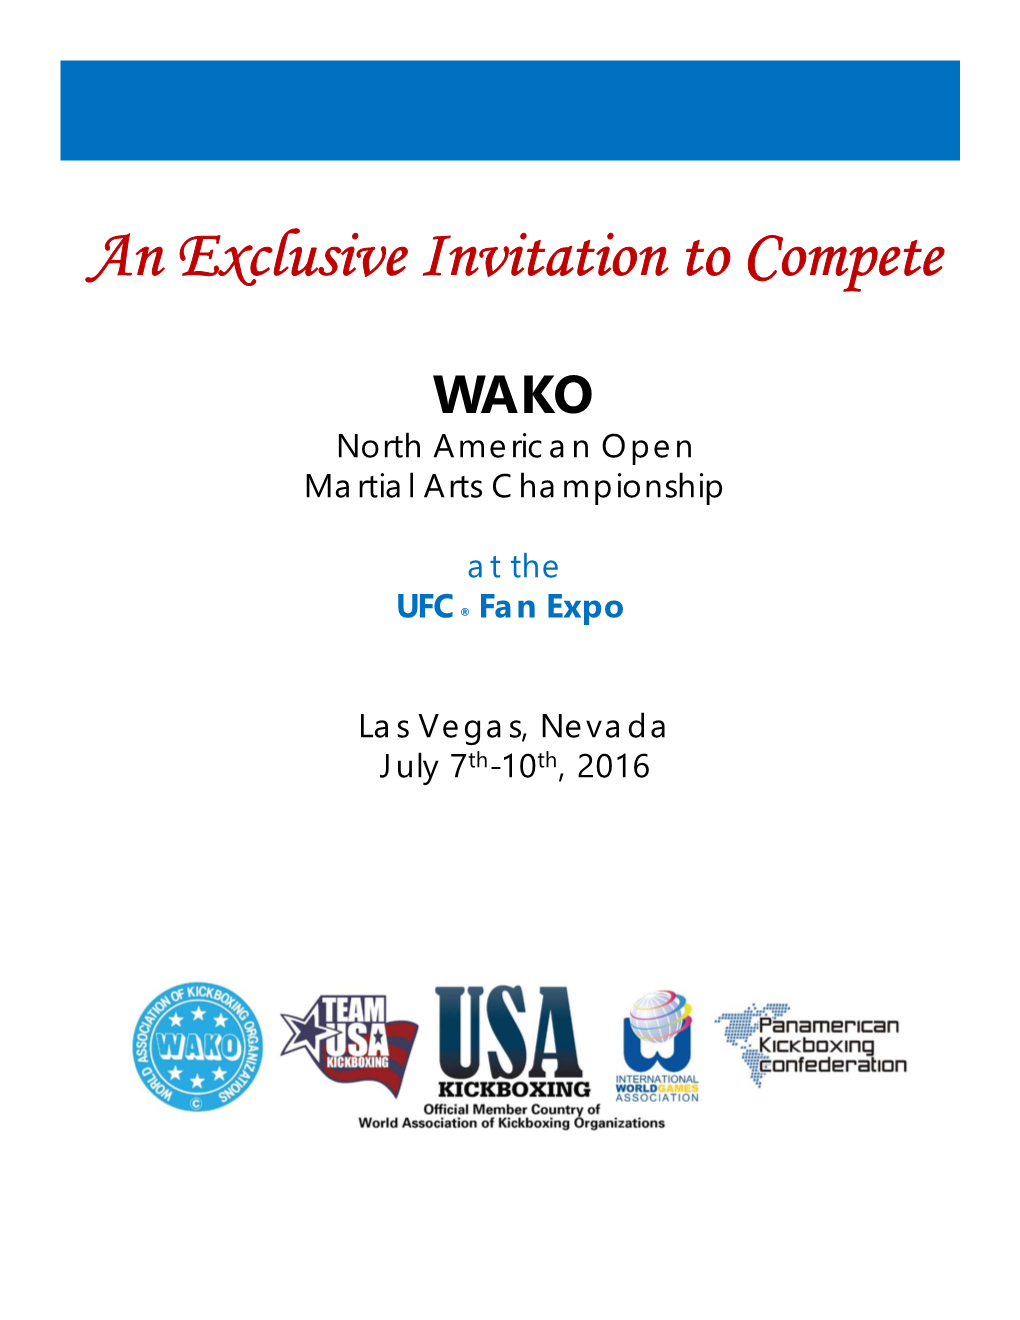 An Exclusive Invitation to Compete